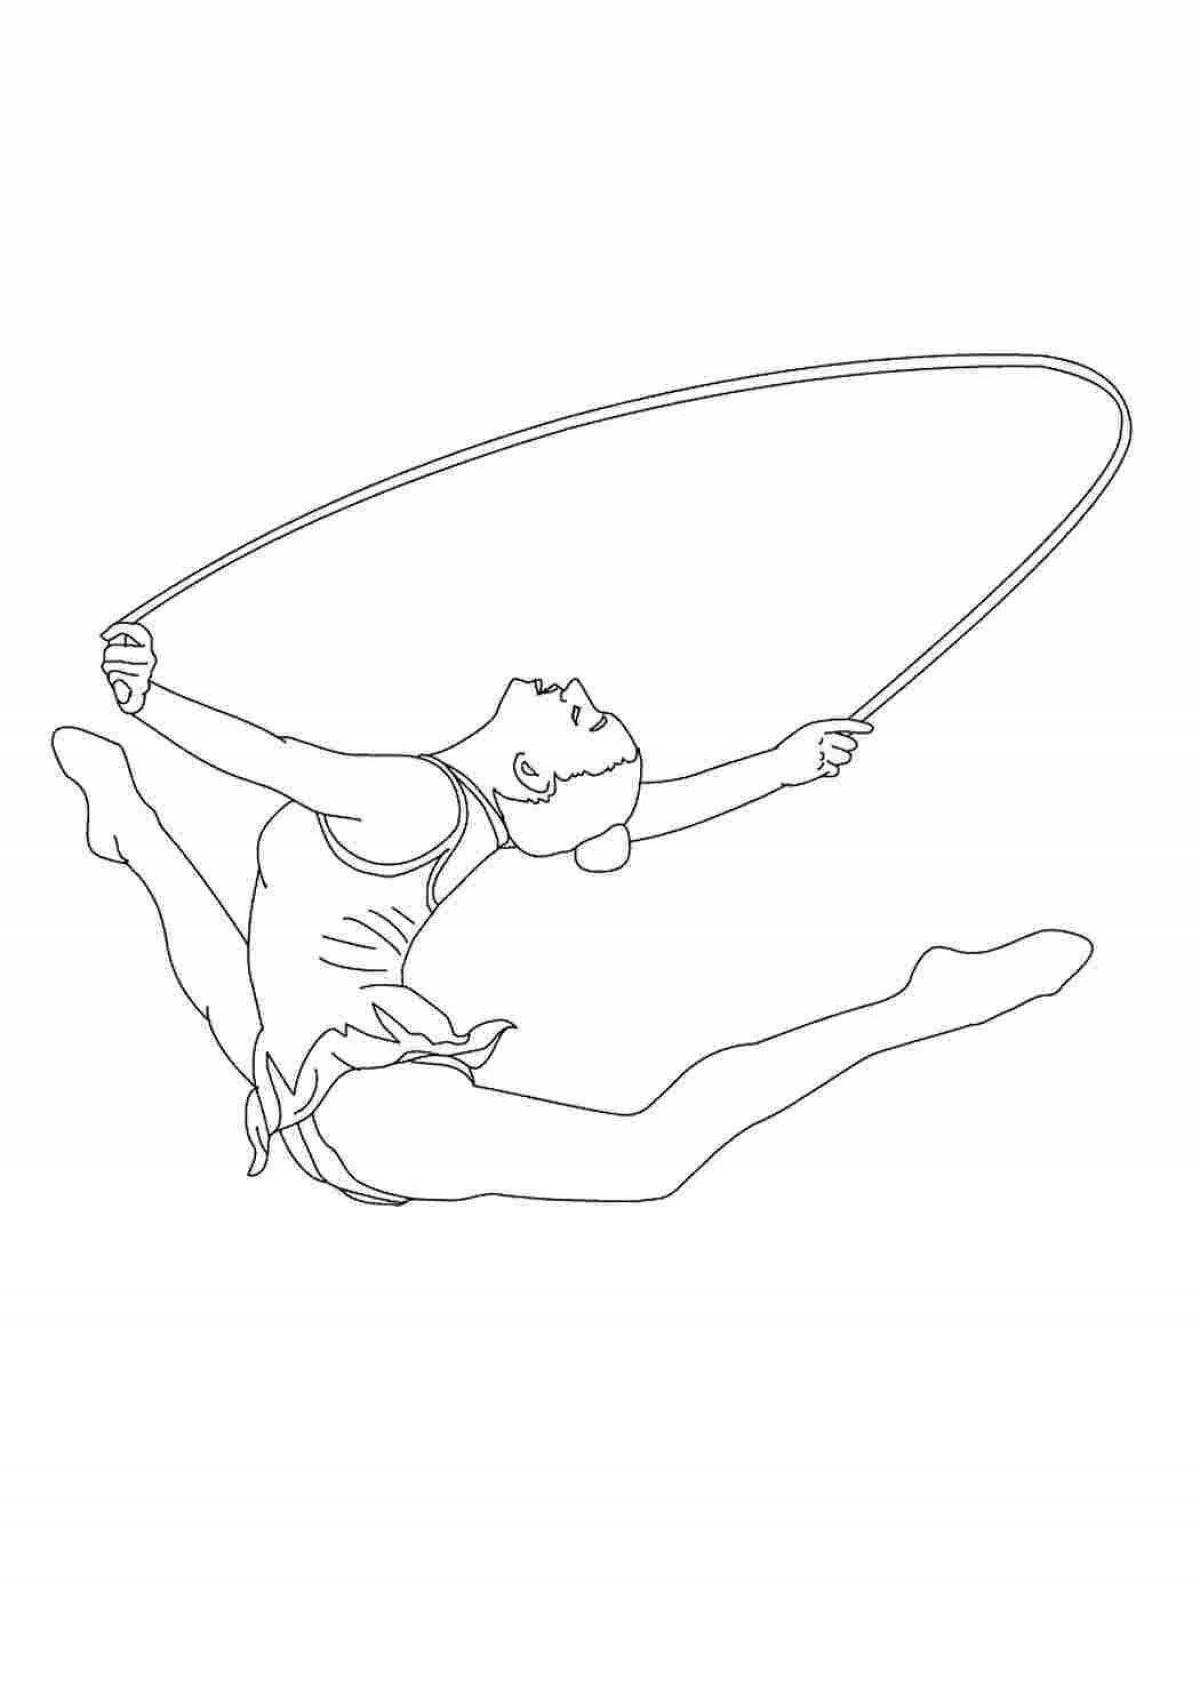 Coloring page glamor aerialist